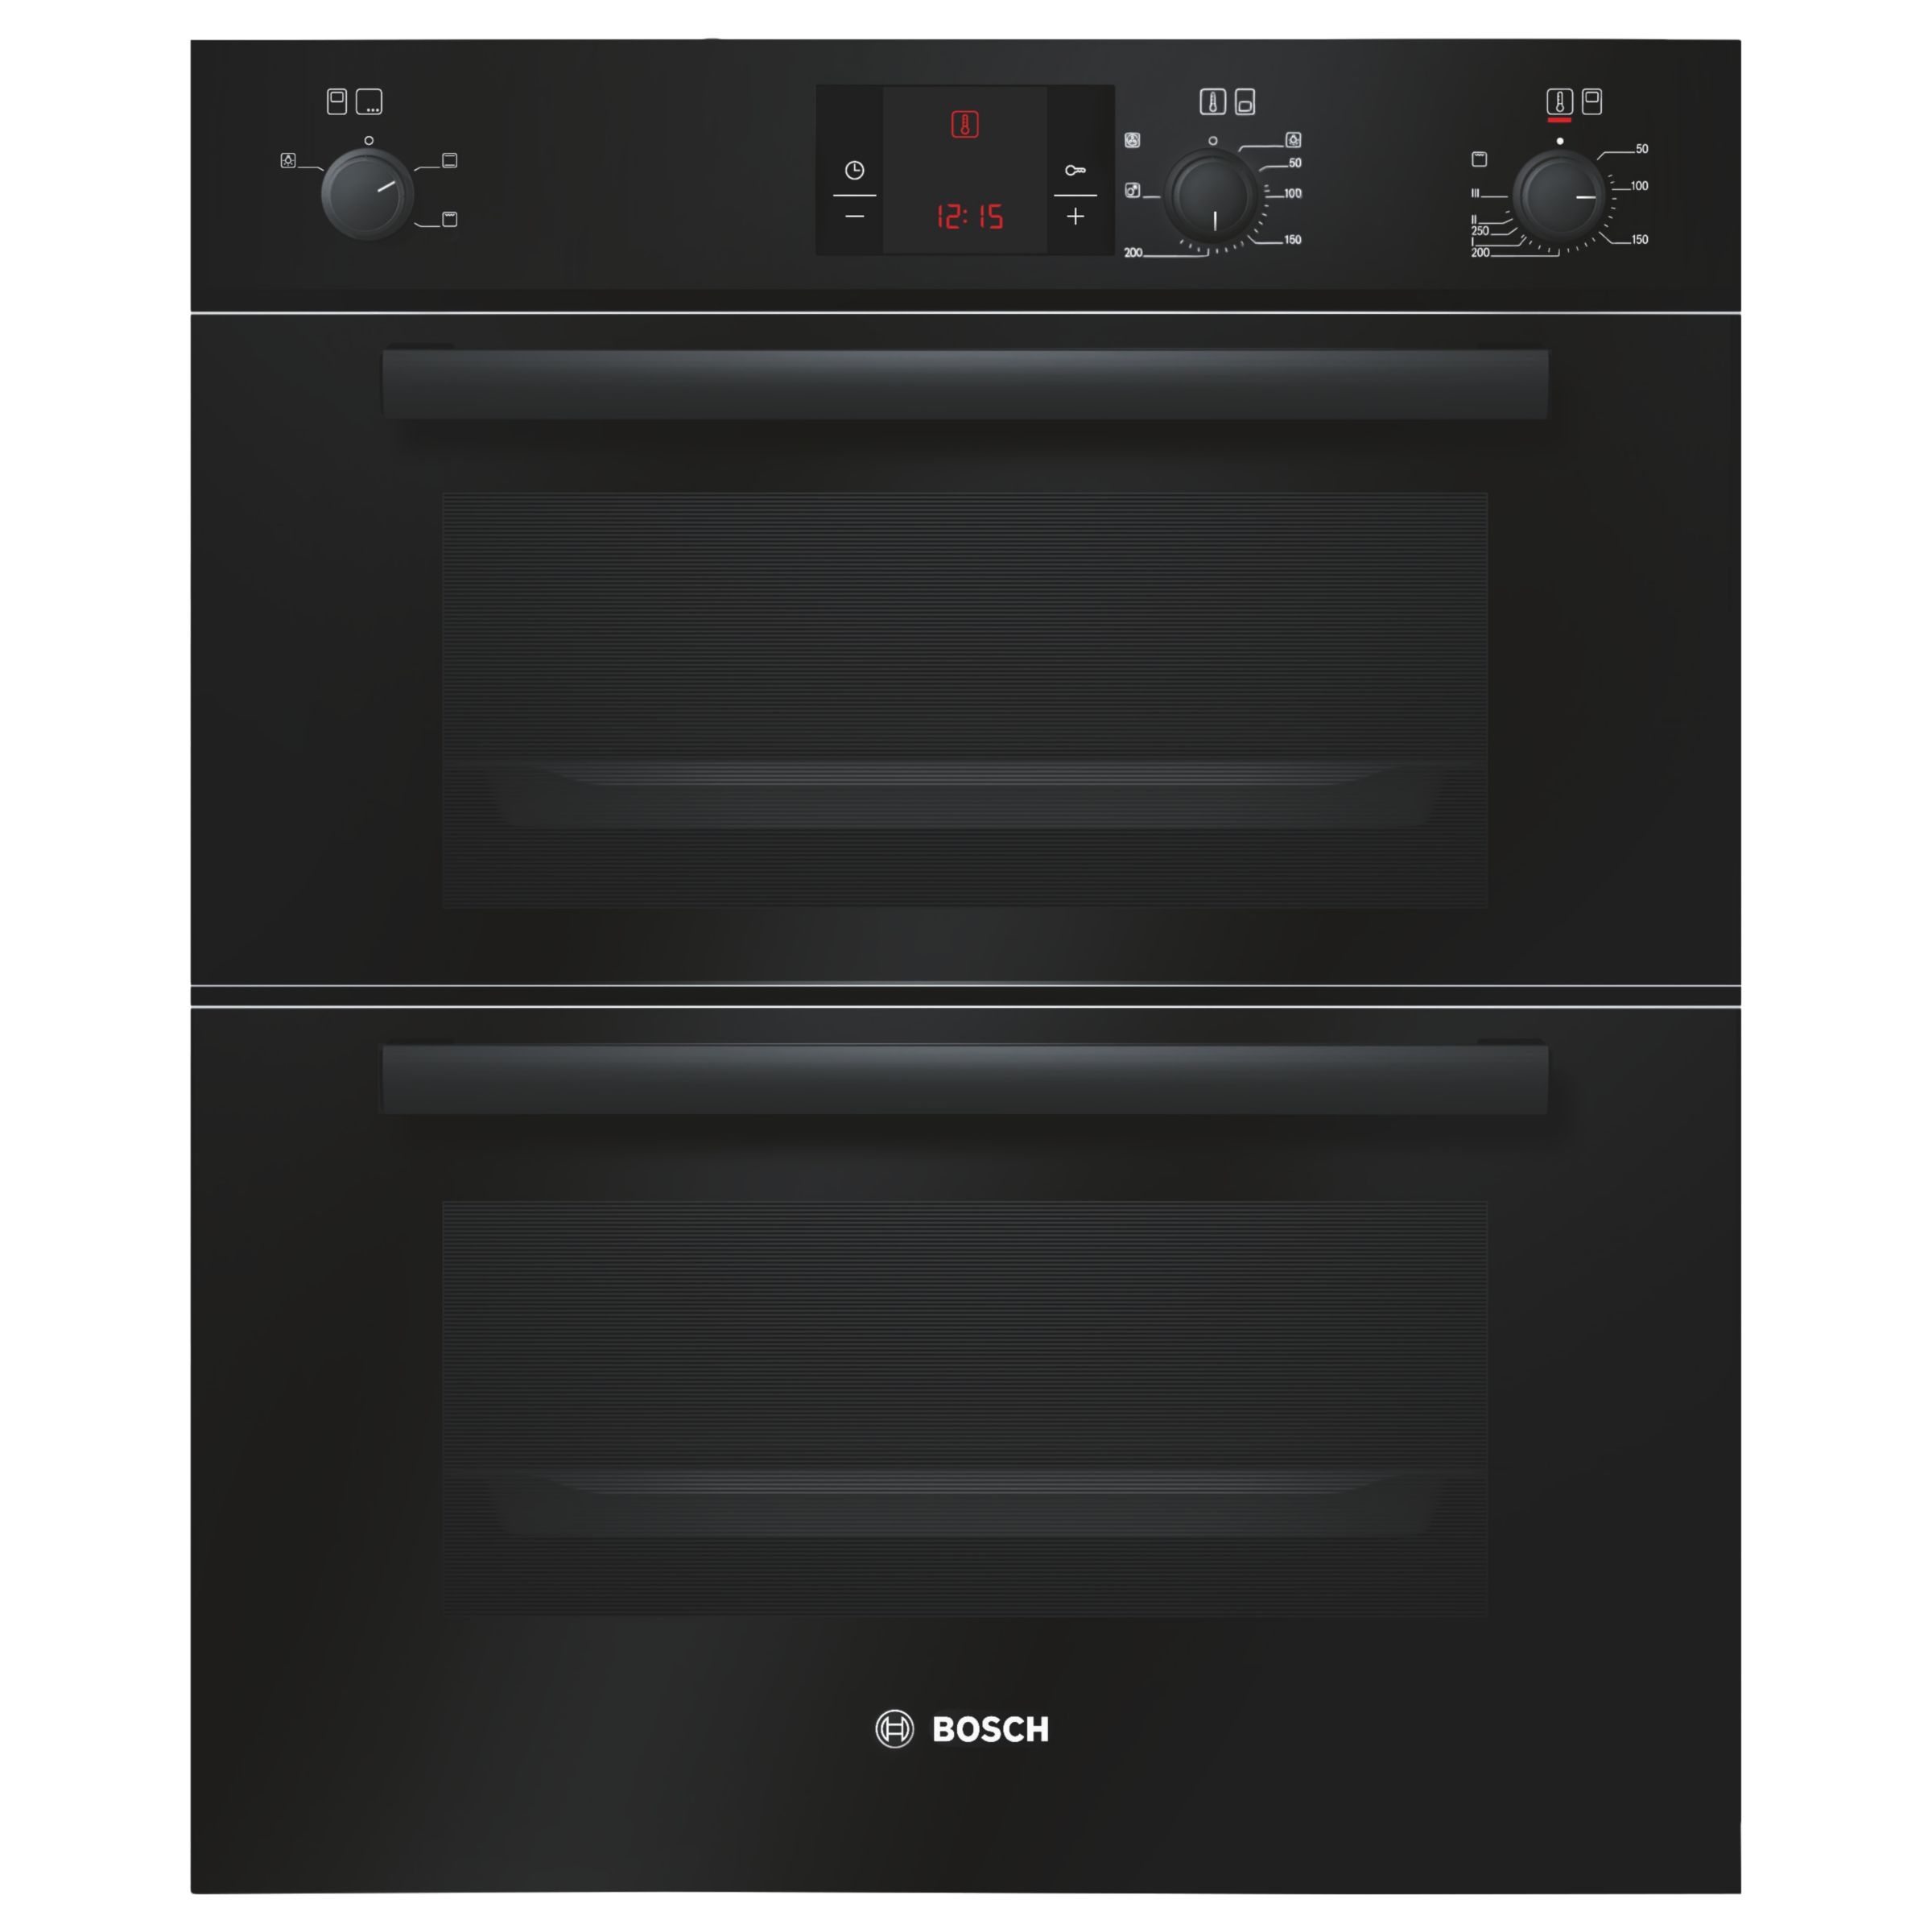 Bosch HBN13B261B Double Electric Oven, Black at John Lewis